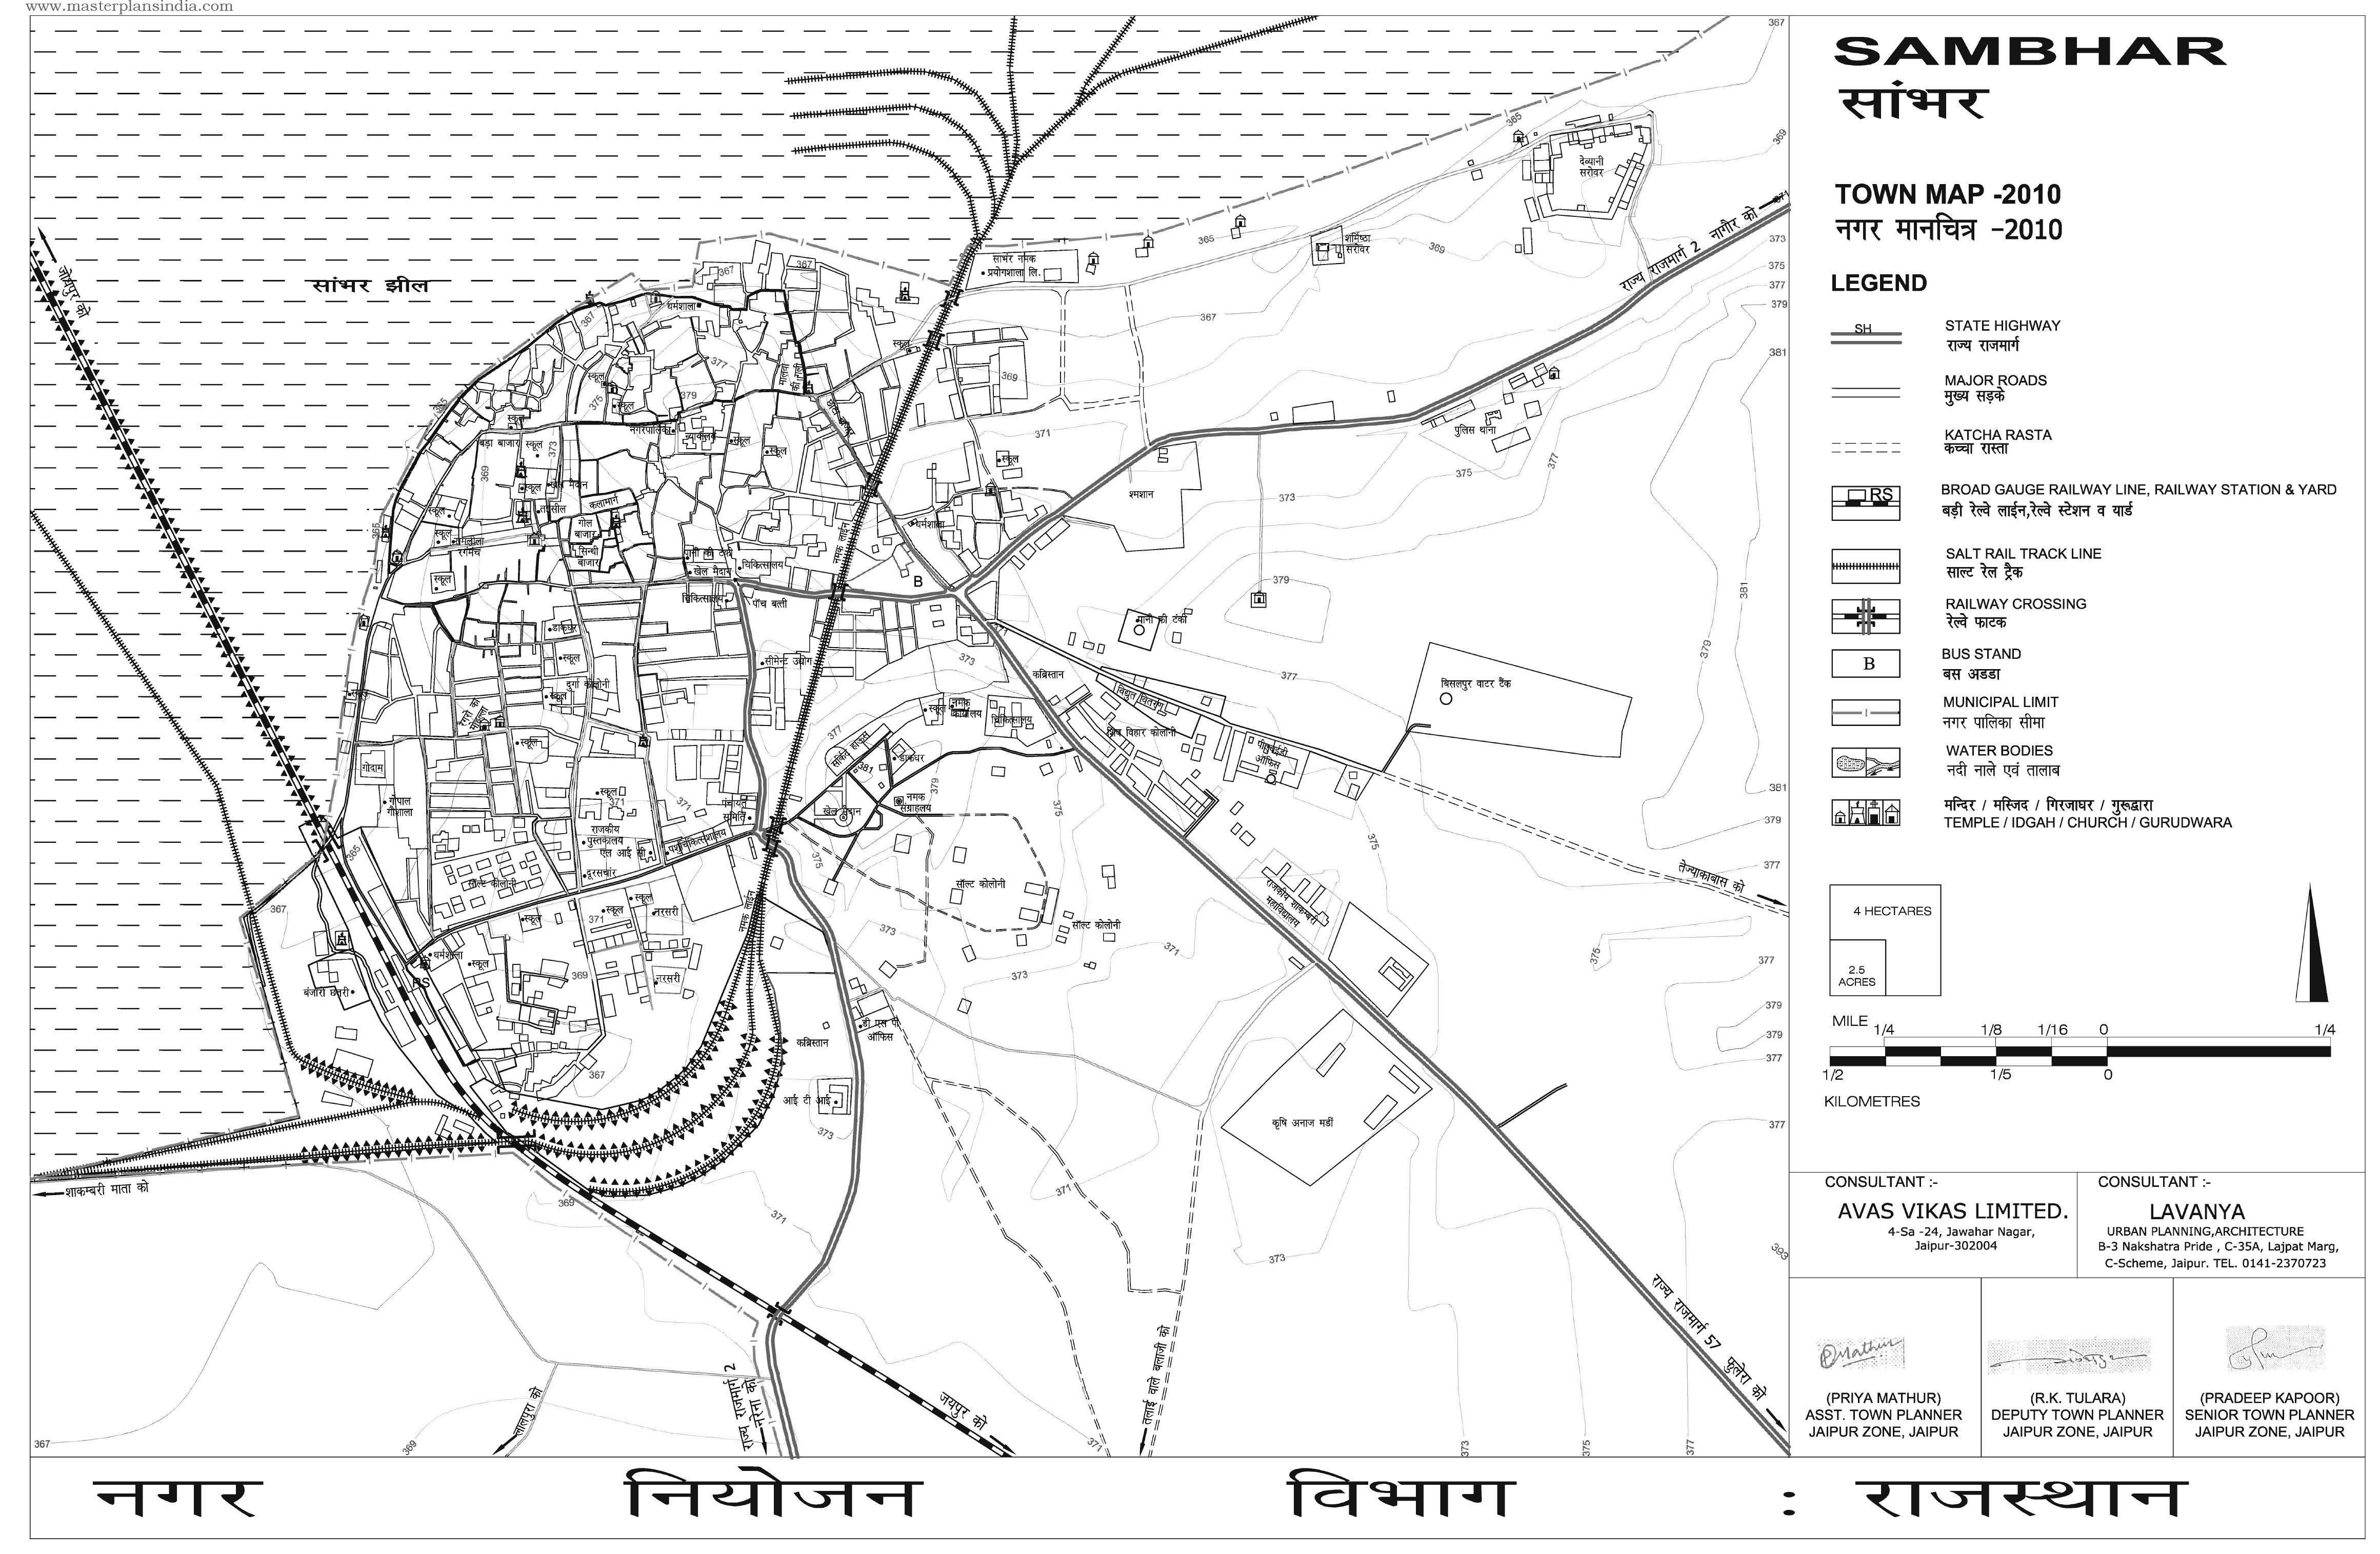 Ranchi Proposed Roads Alignment - Master Plans India